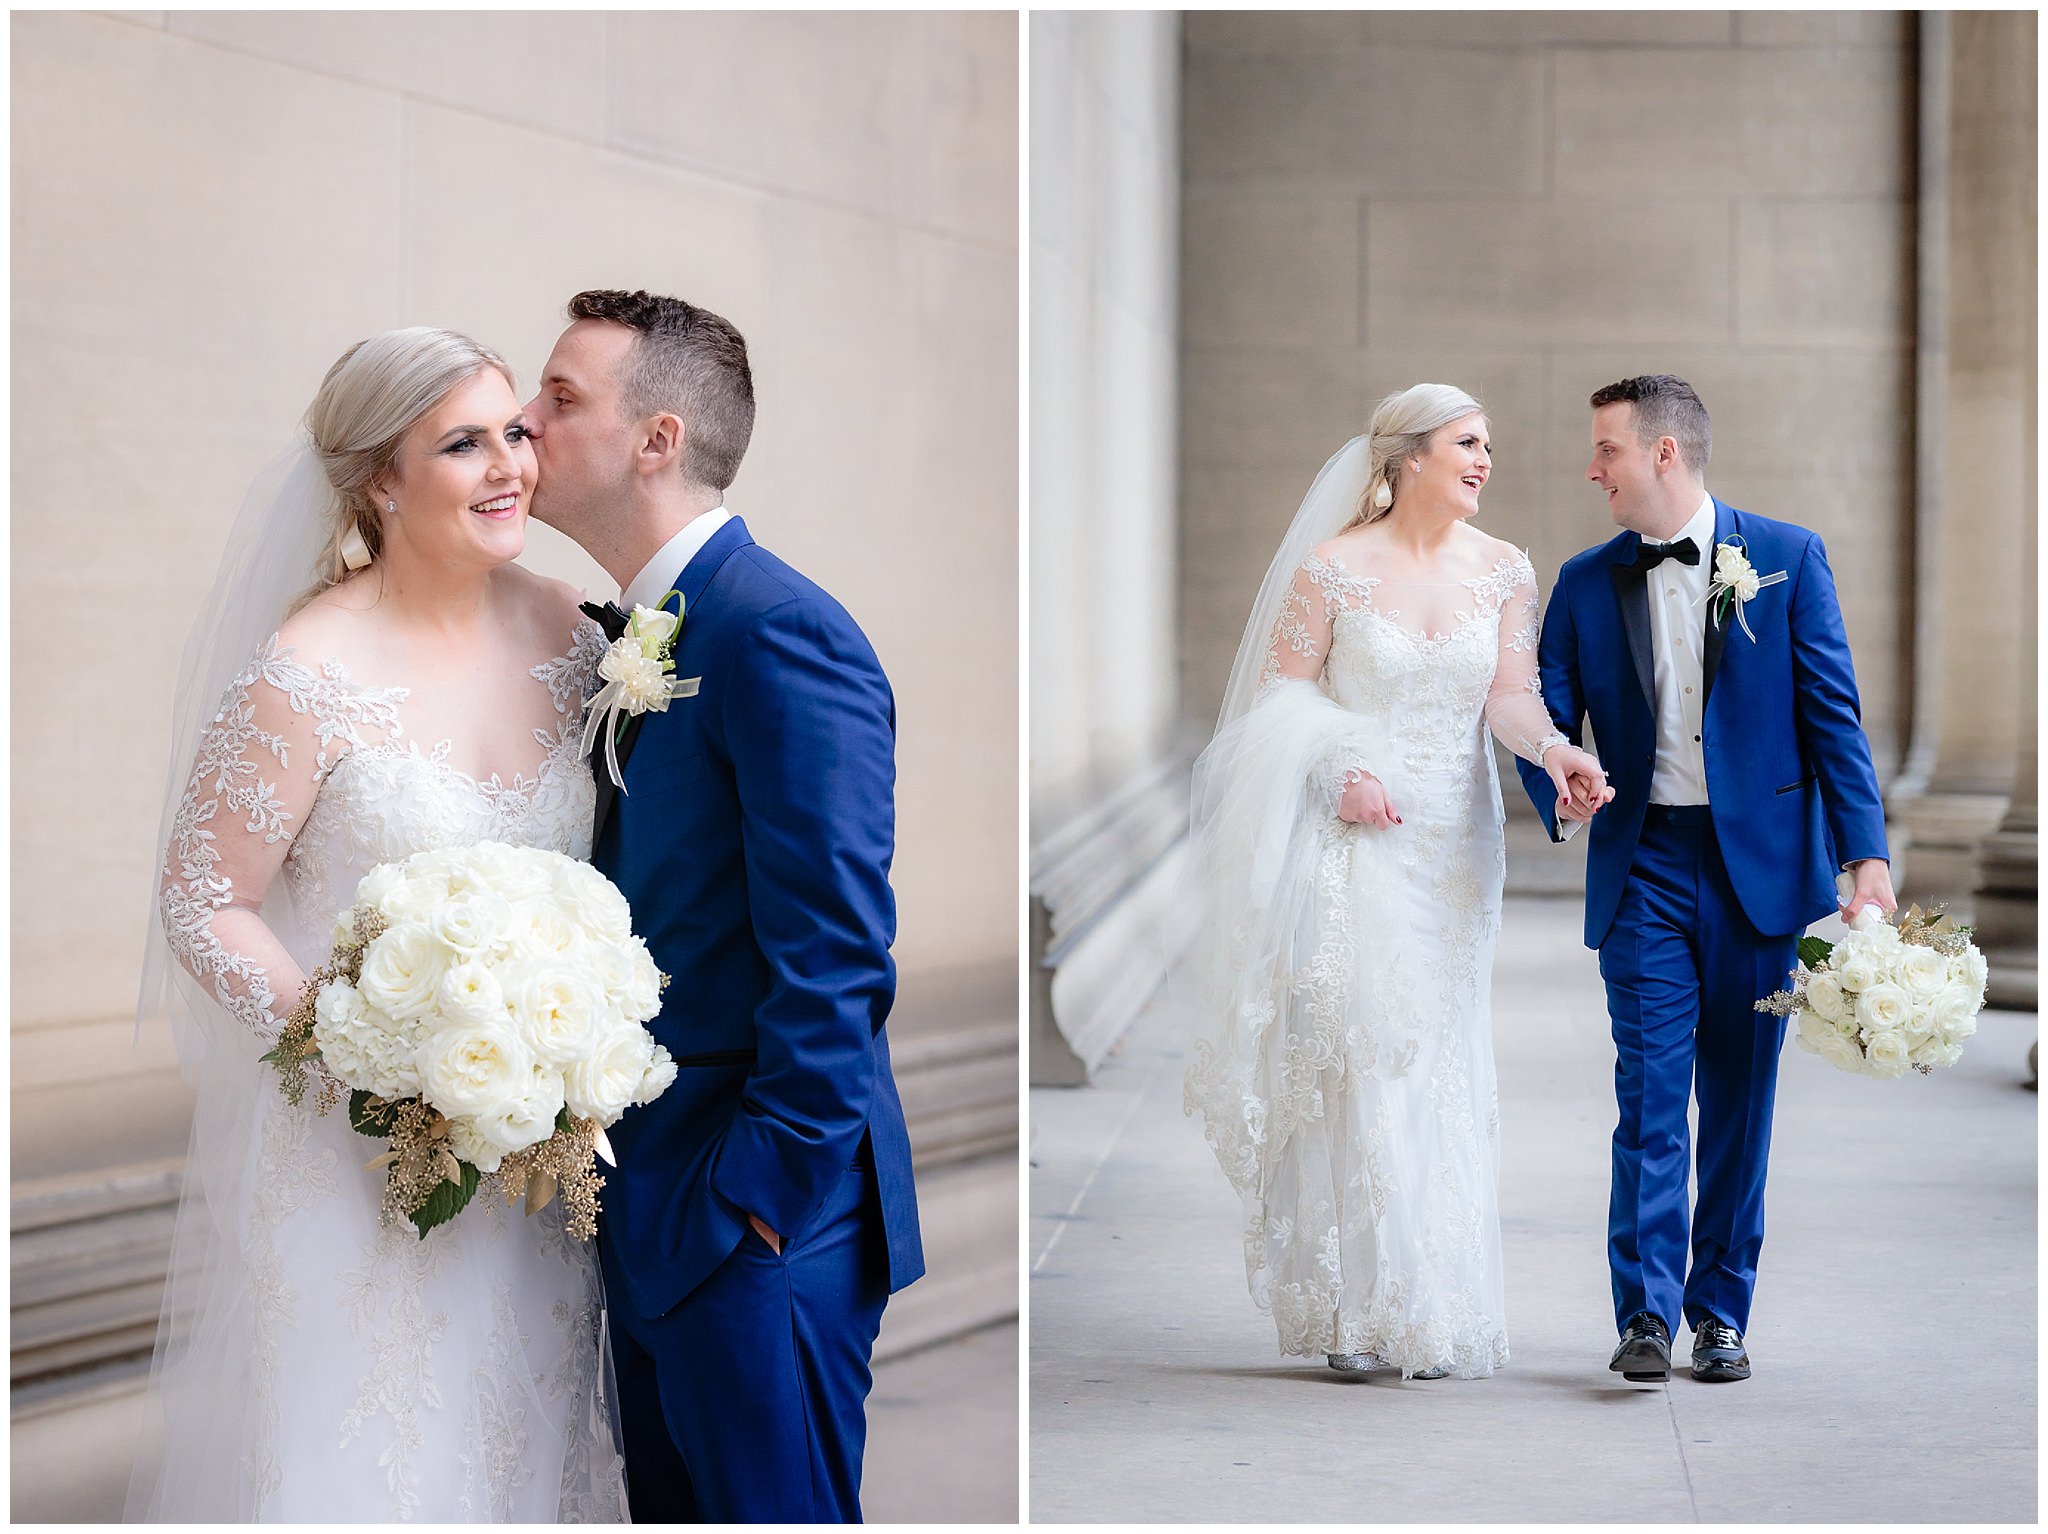 Classic traditional wedding portraits before a Soldiers & Sailors wedding